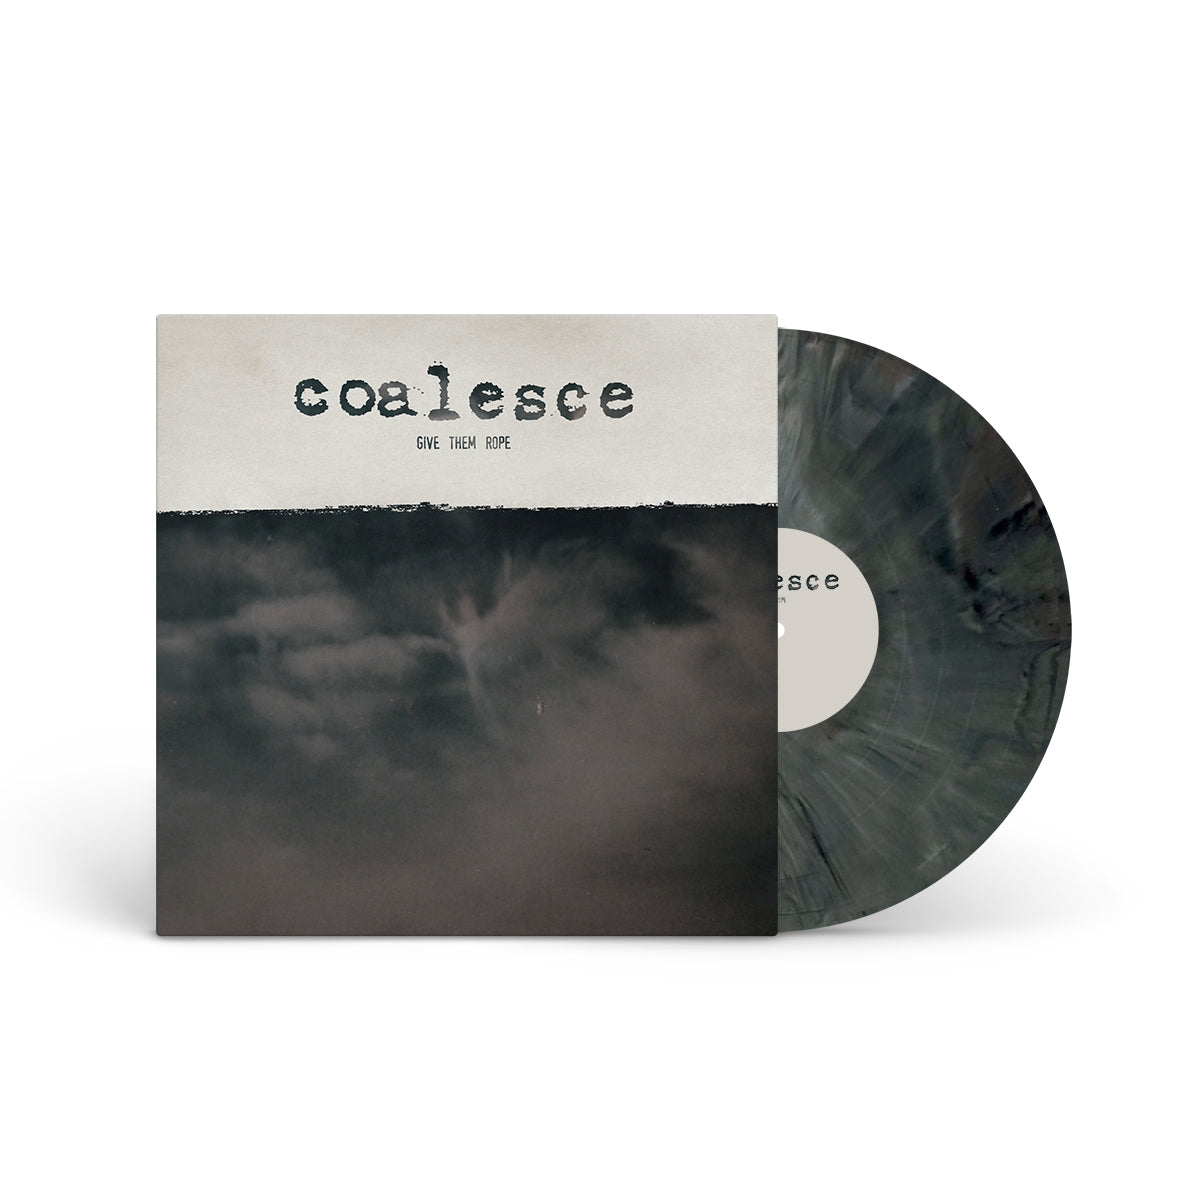 COALESCE "Give Them Rope (Reissue)" LP